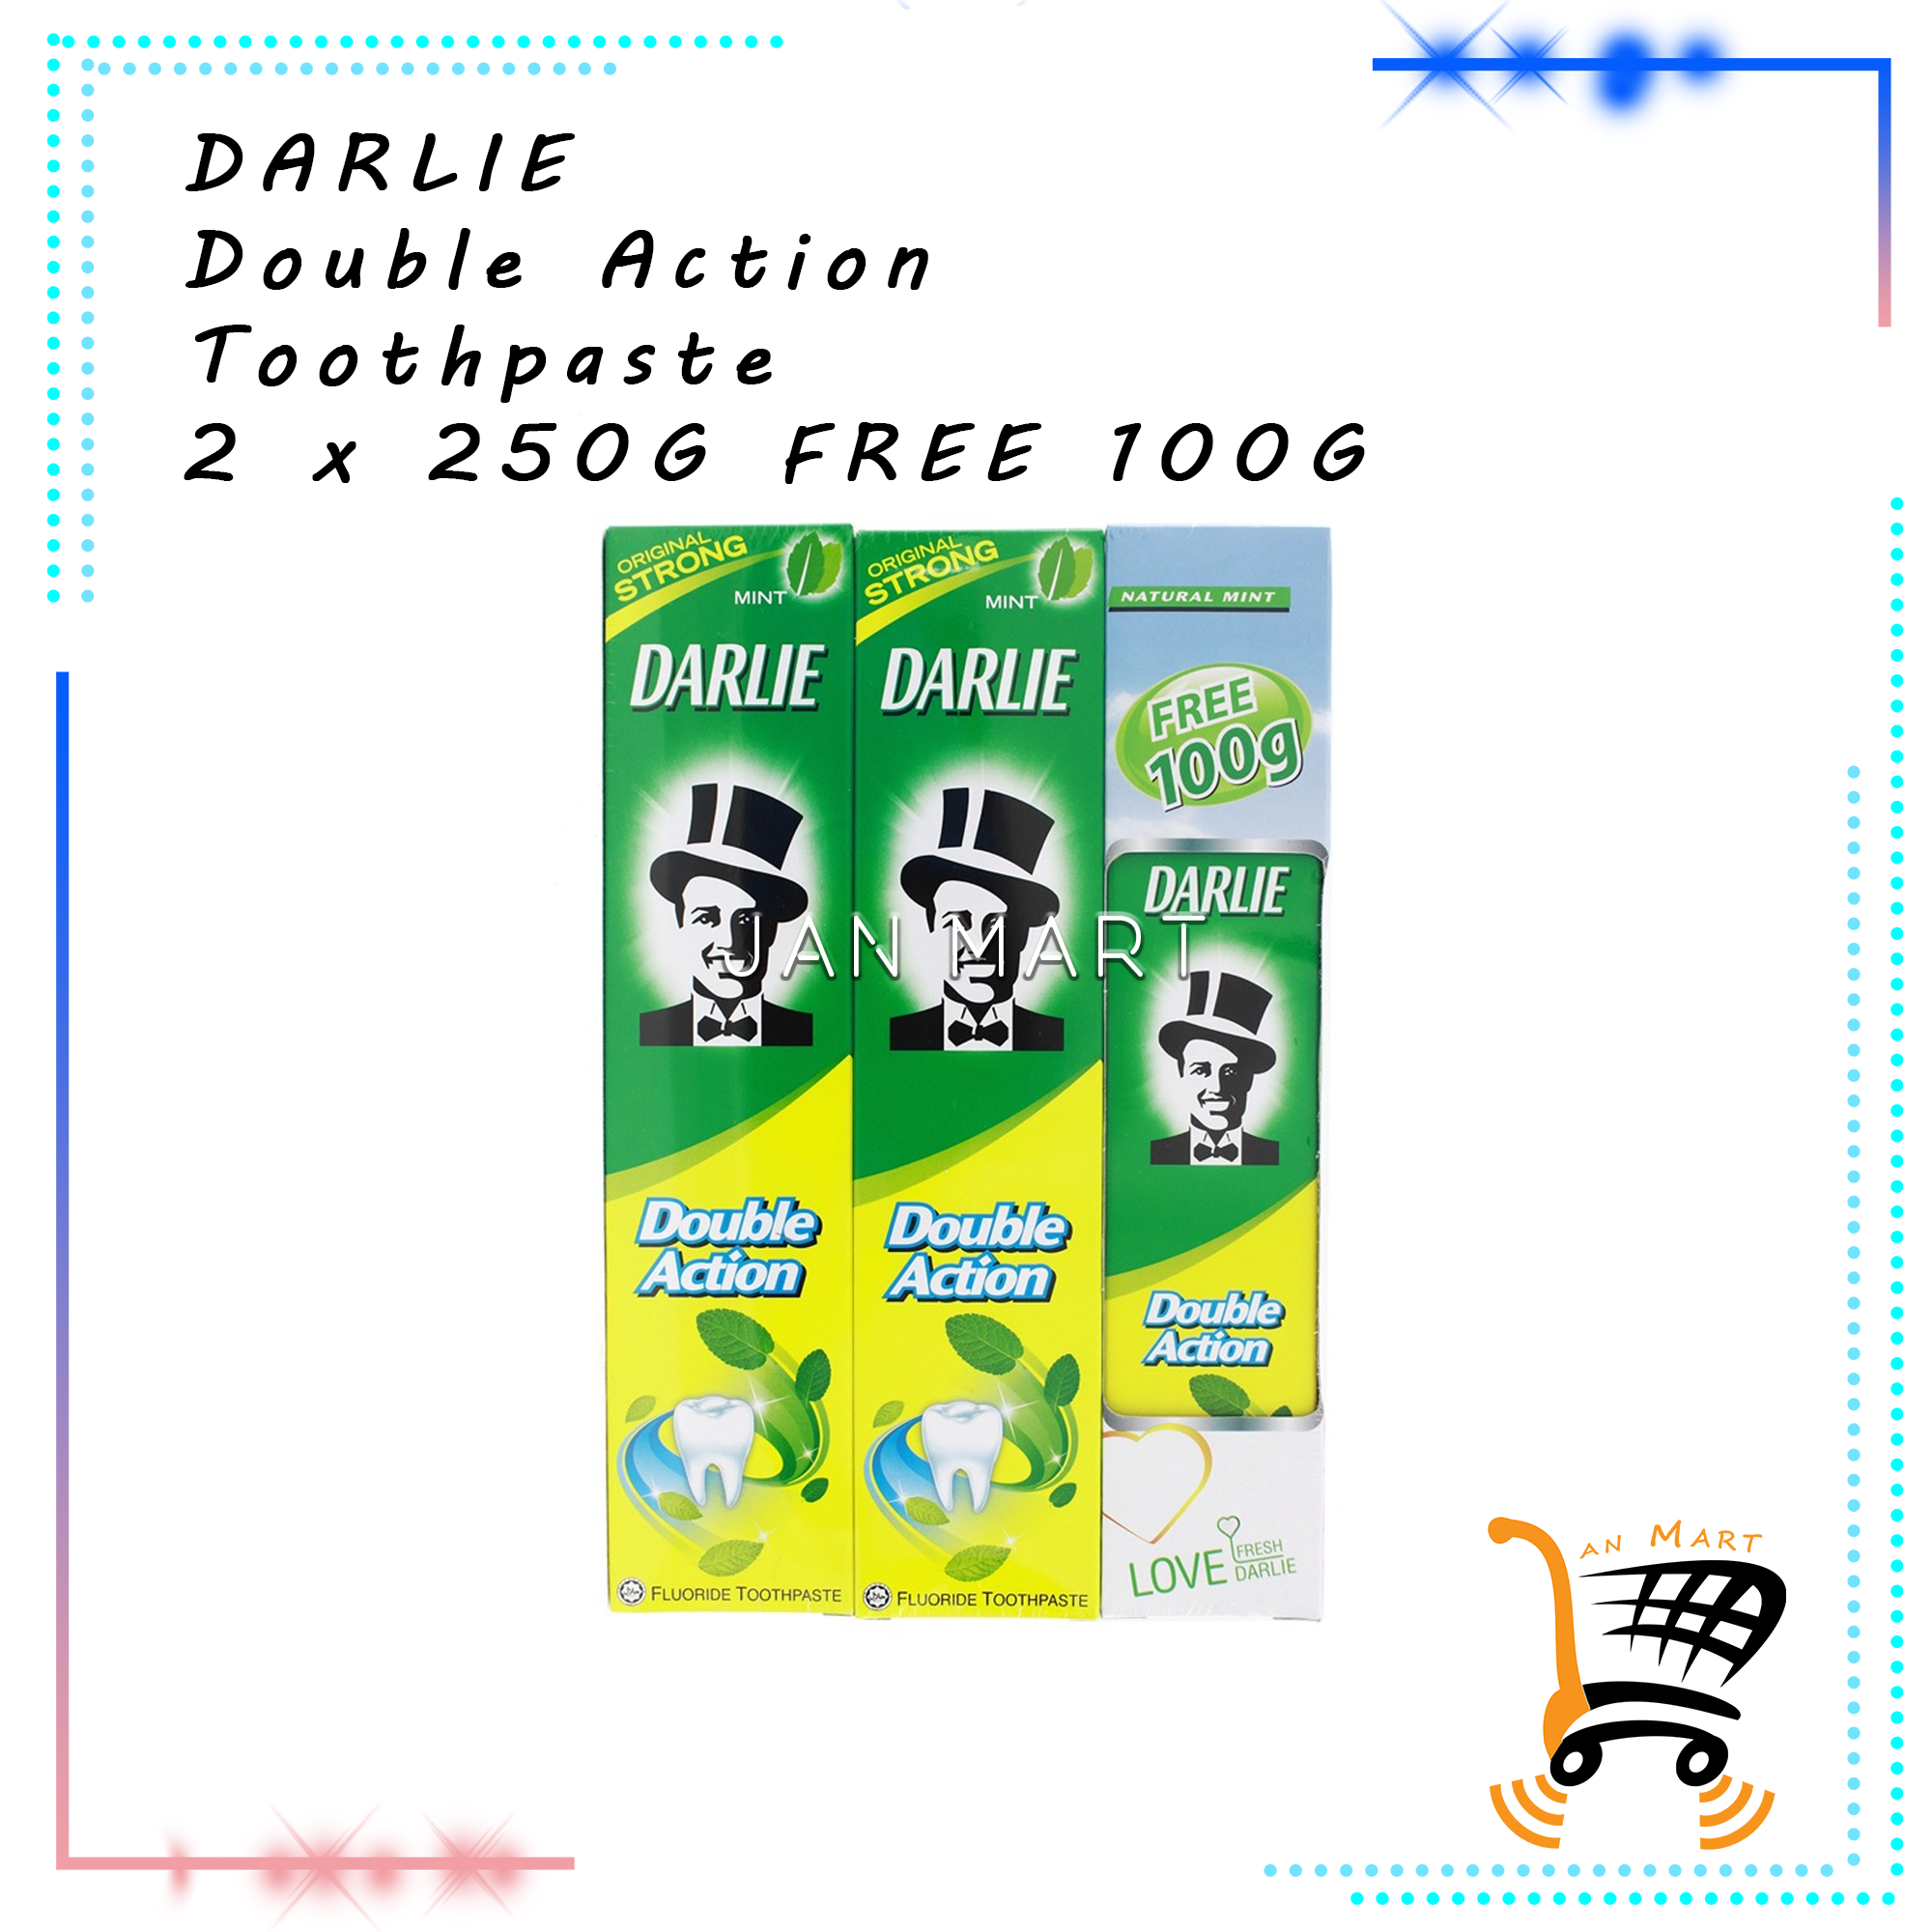 DARLIE Double Action Toothpaste 2 x 250G FREE 100G